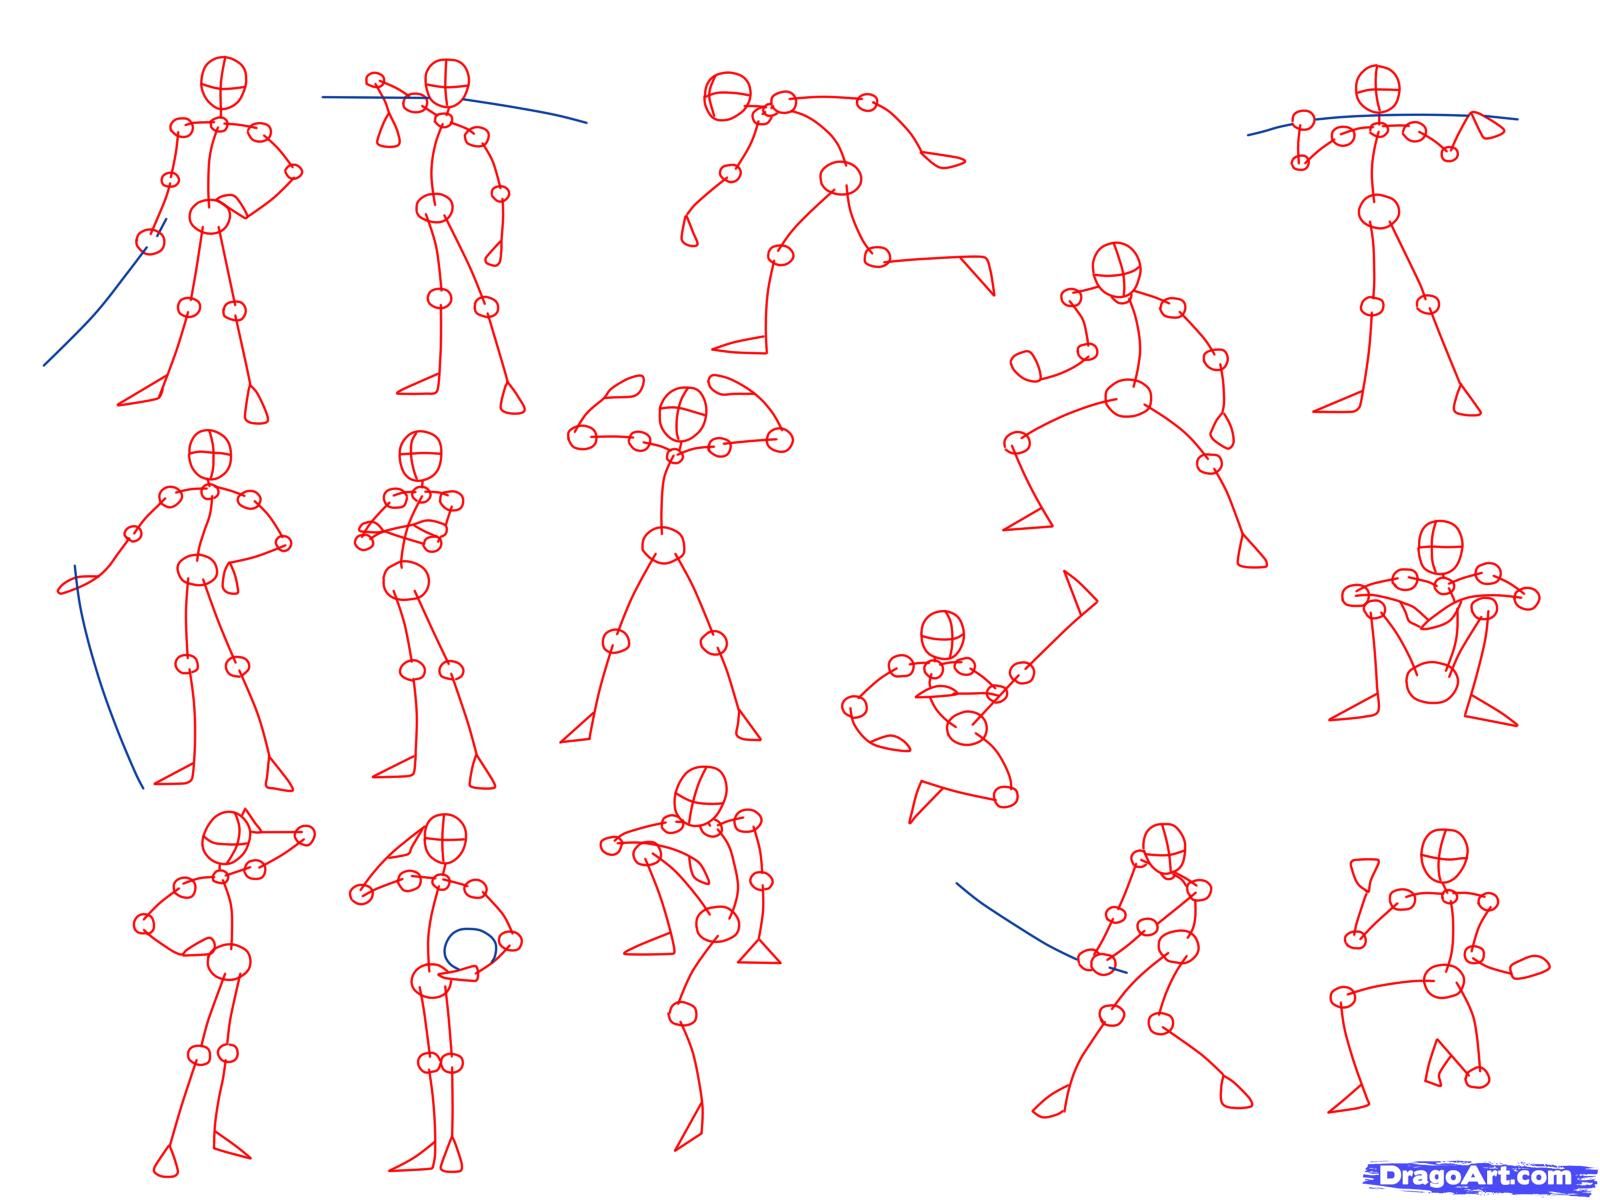 Poses for Artists - New pose! More of my free art references and how-to  draw videos on https://www.posemuse.com/free-poses | Facebook